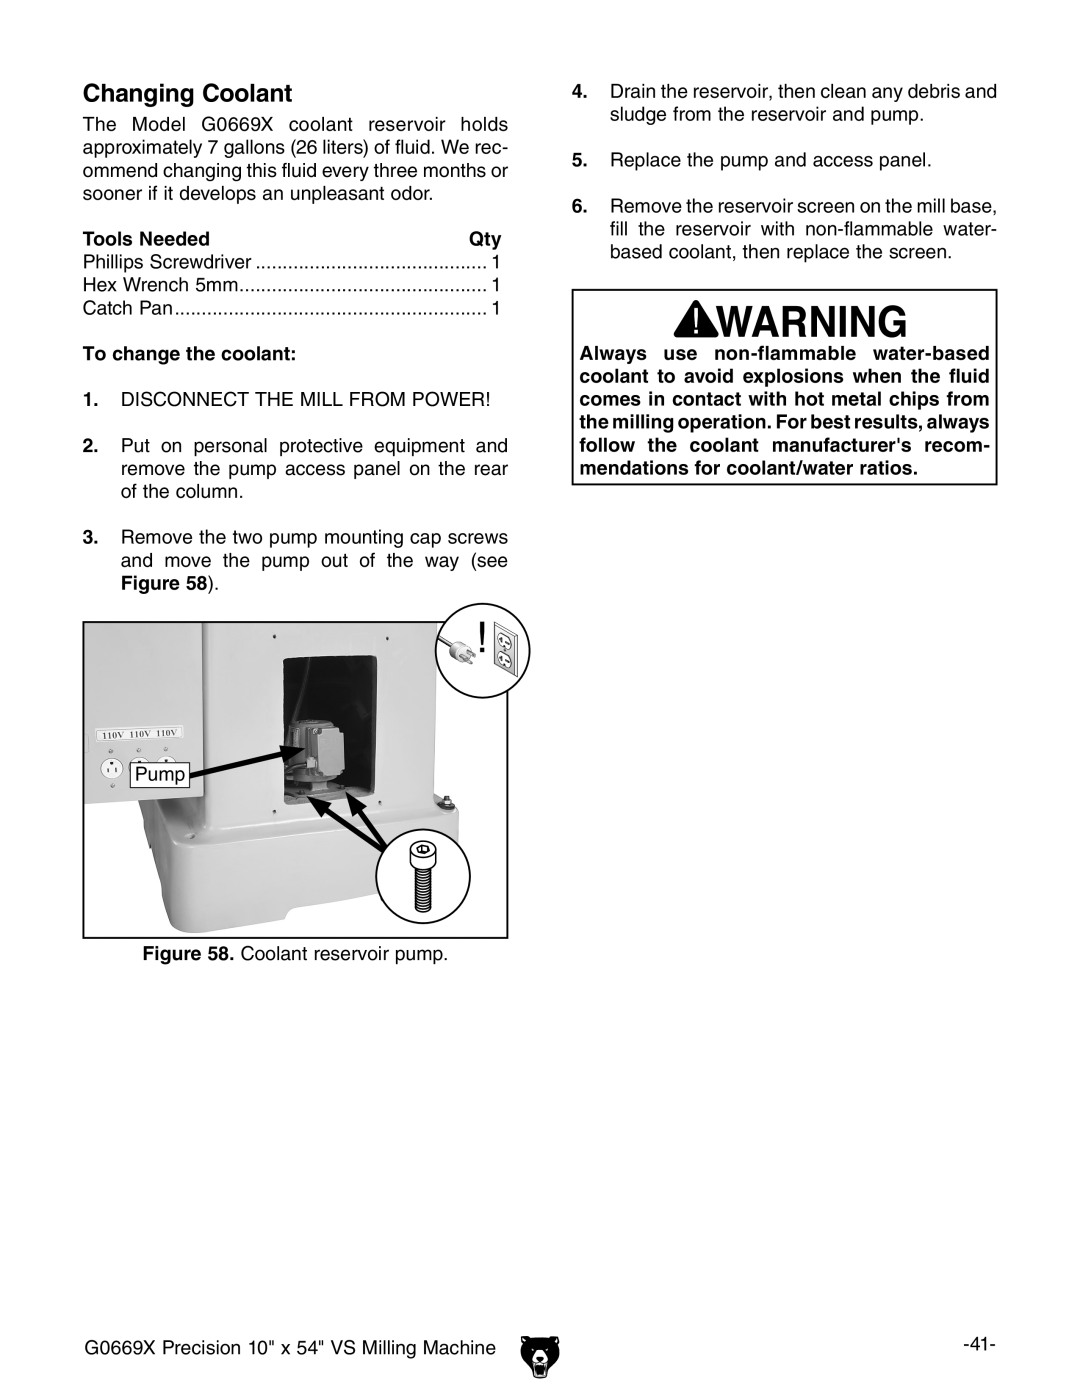 Grizzly g0669X owner manual Changing Coolant, To change the coolant, Tools Needed, Pump 